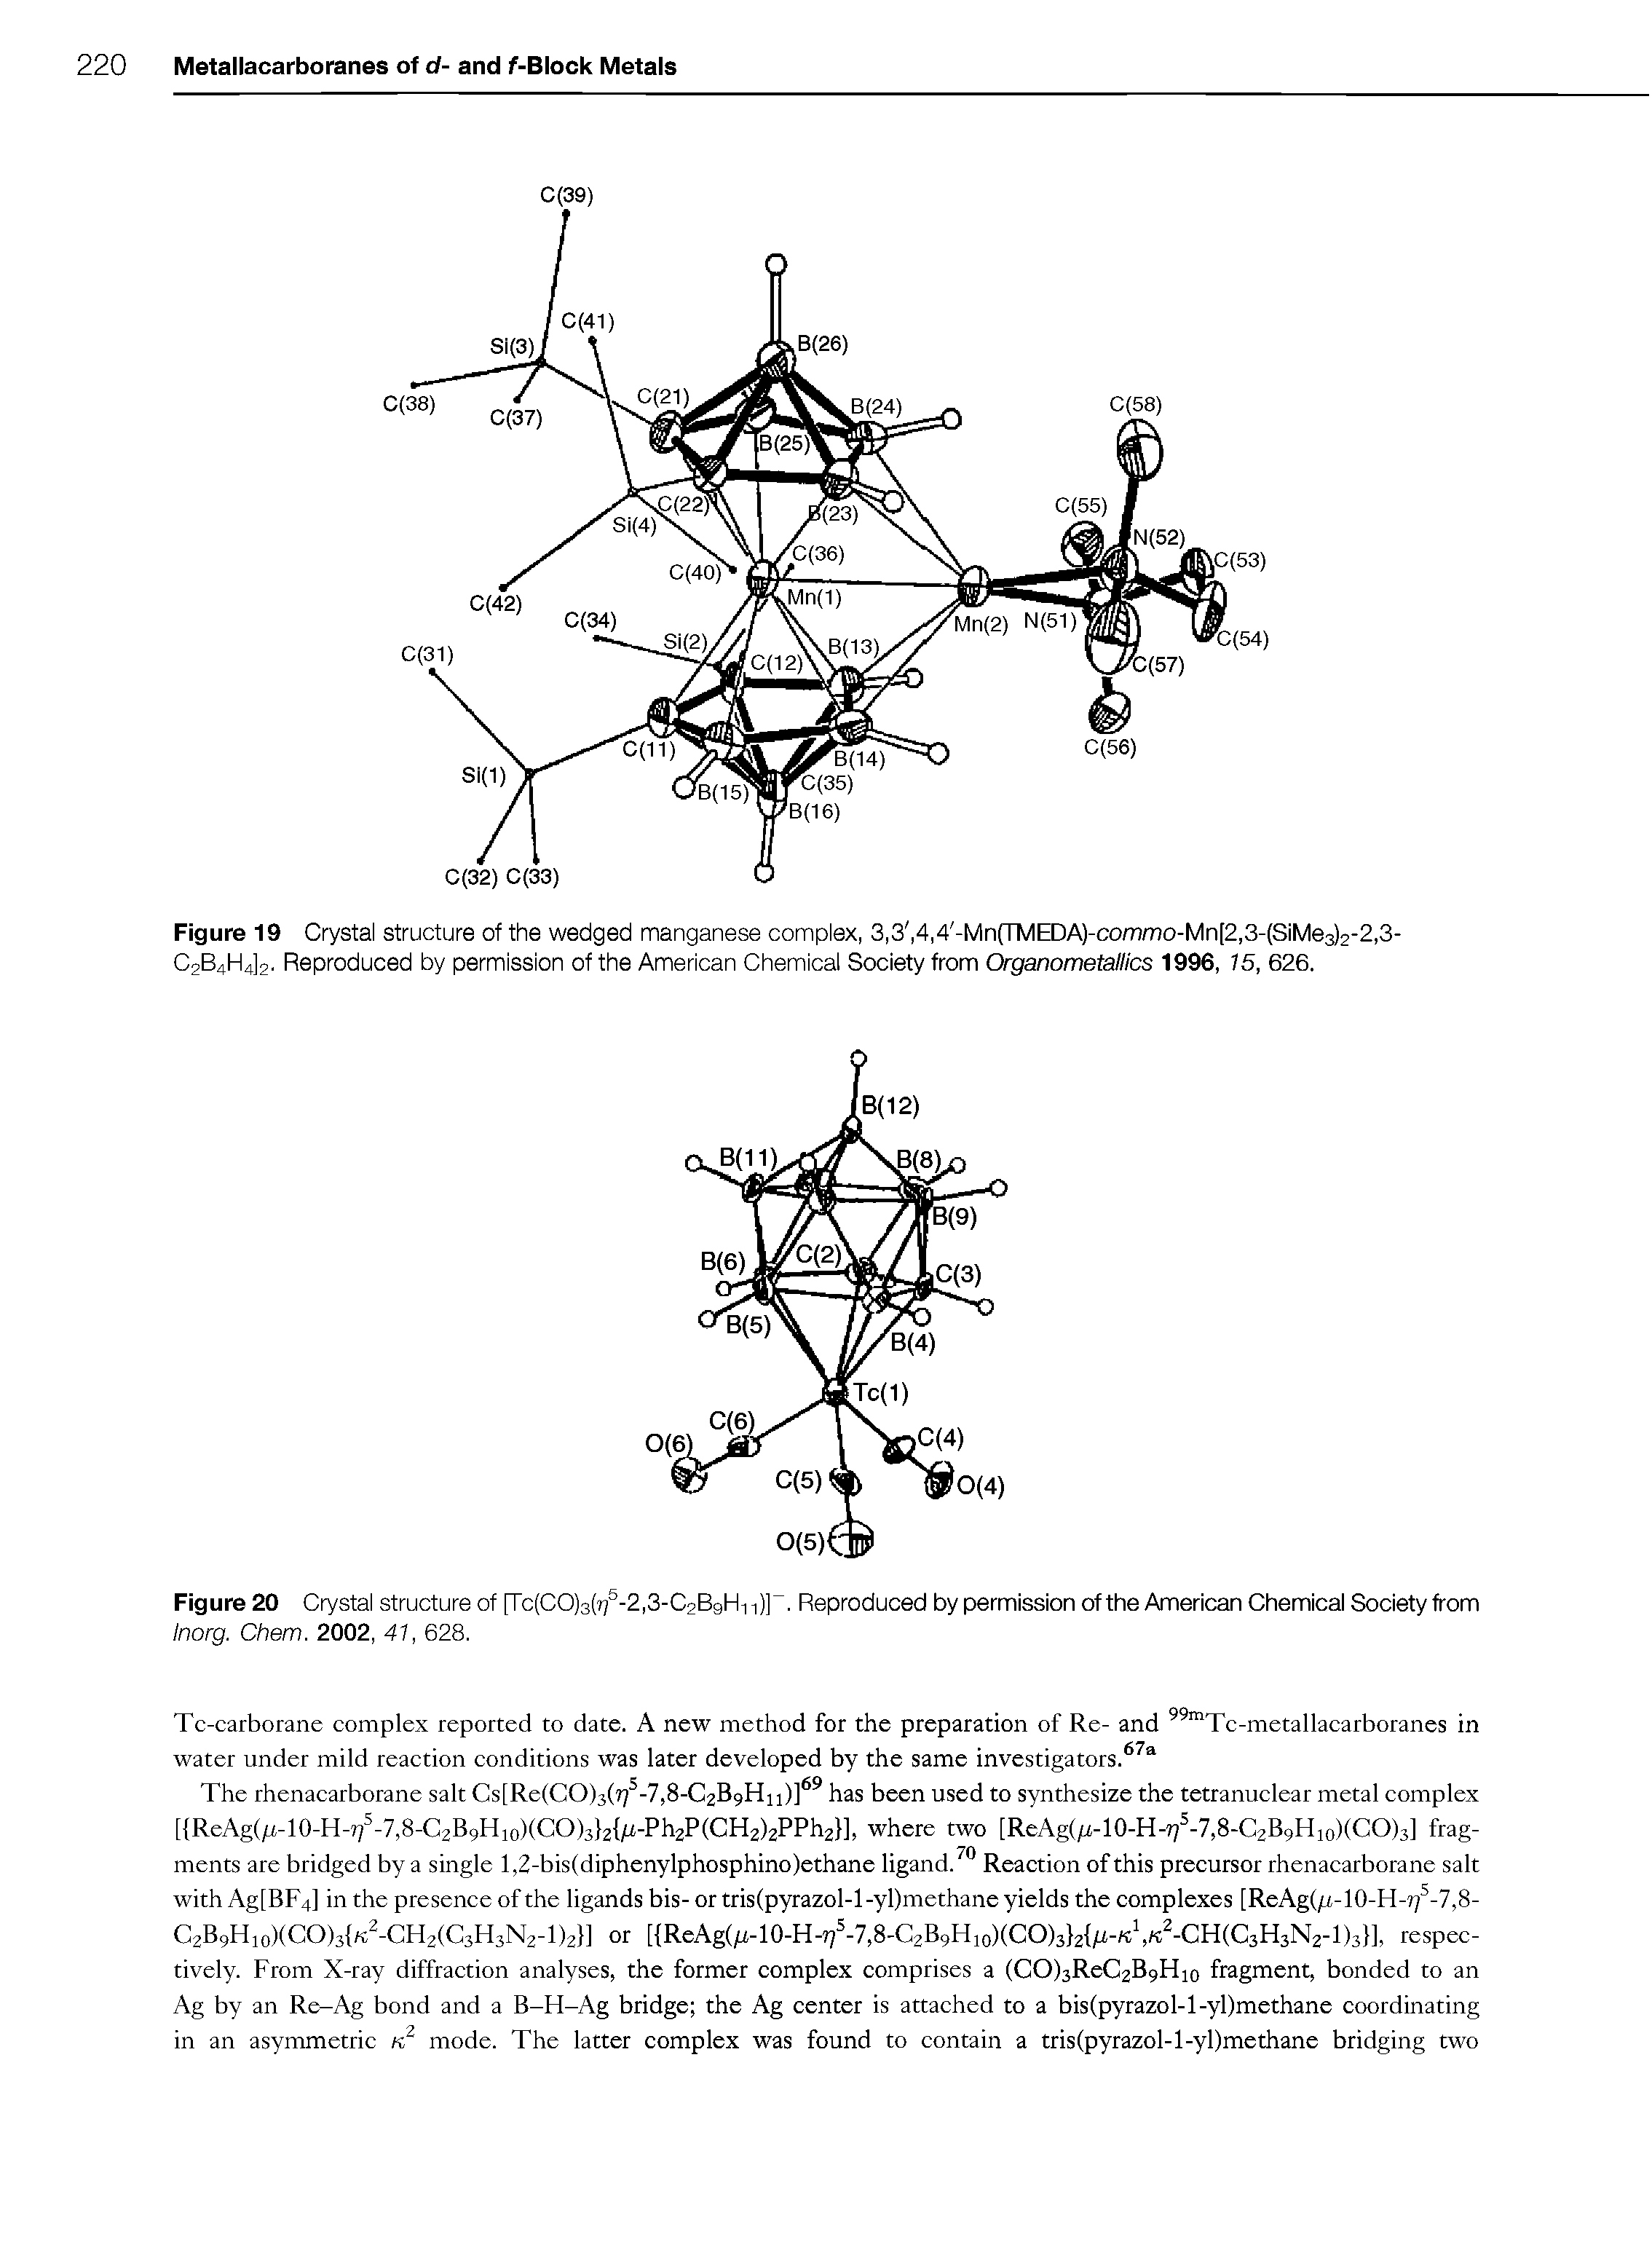 Figure 19 Crystal structure of the wedged manganese complex, 3,3, 4,4 -Mn(TMEDA)-commo-Mn[2,3-(SiMe3)2-2,3-C2B4HJ2. Reproduced by permission of the American Chemical Society from Organometallics 1996, 15, 626.